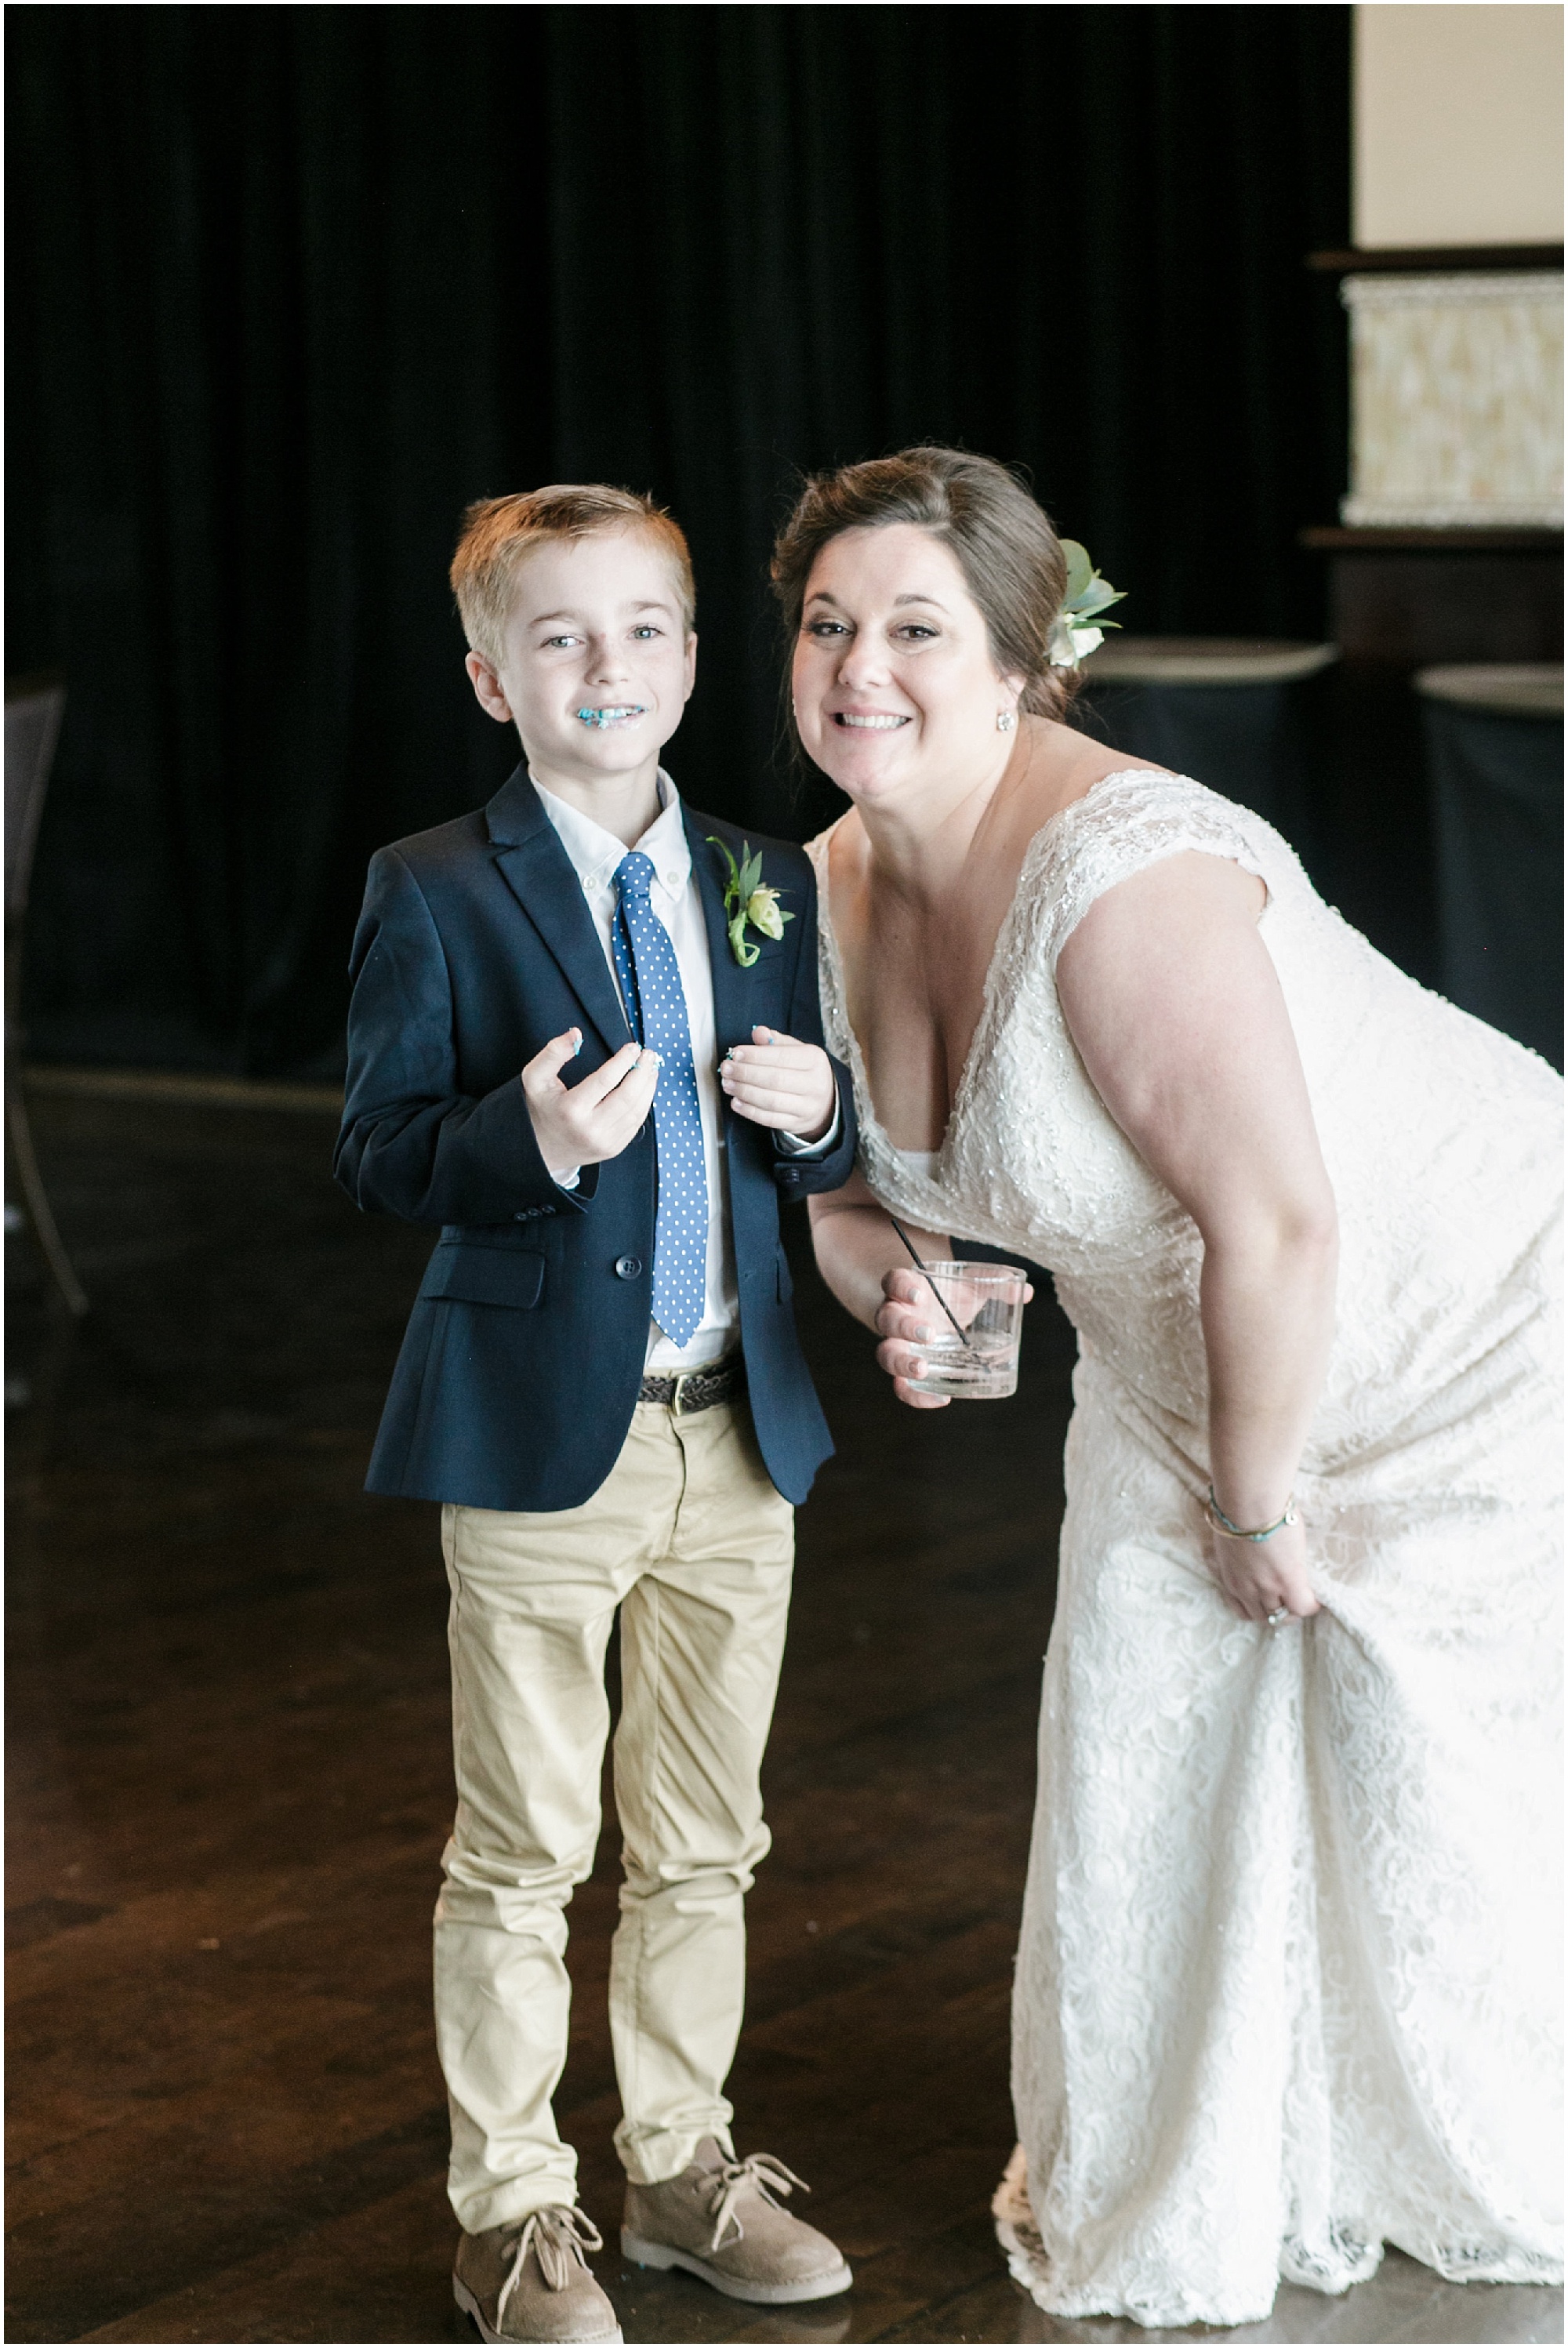 Bride poses with her son who has cake on his face. 